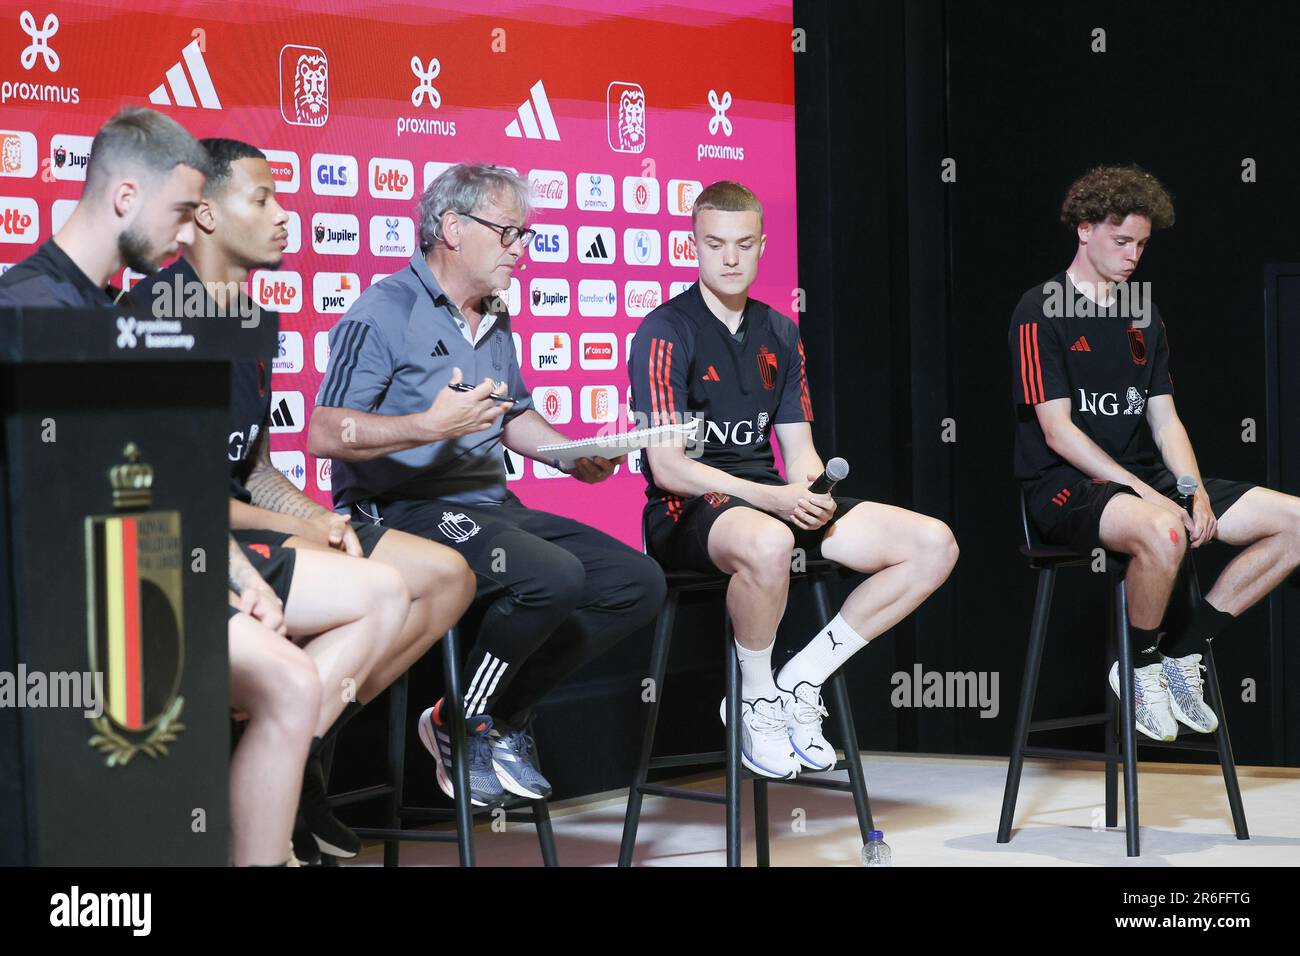 Tubize, Belgium. 09th June, 2023. Belgium's Zeno Debast, Belgium's Aster Vranckx, Belgium's U21 head coach Jacky Mathijssen, Belgium's Hugo Siquet and Belgium's Maxim De Cuyper pictured during a press conference of the U21 youth team of the Belgian national soccer team Red Devils, Friday 09 June 2023 in Tubize. The Belgian U21 team is preparing for the 2023 European championships in Georgia and Romania from June 21st to July 8th. BELGA PHOTO BRUNO FAHY Credit: Belga News Agency/Alamy Live News Stock Photo